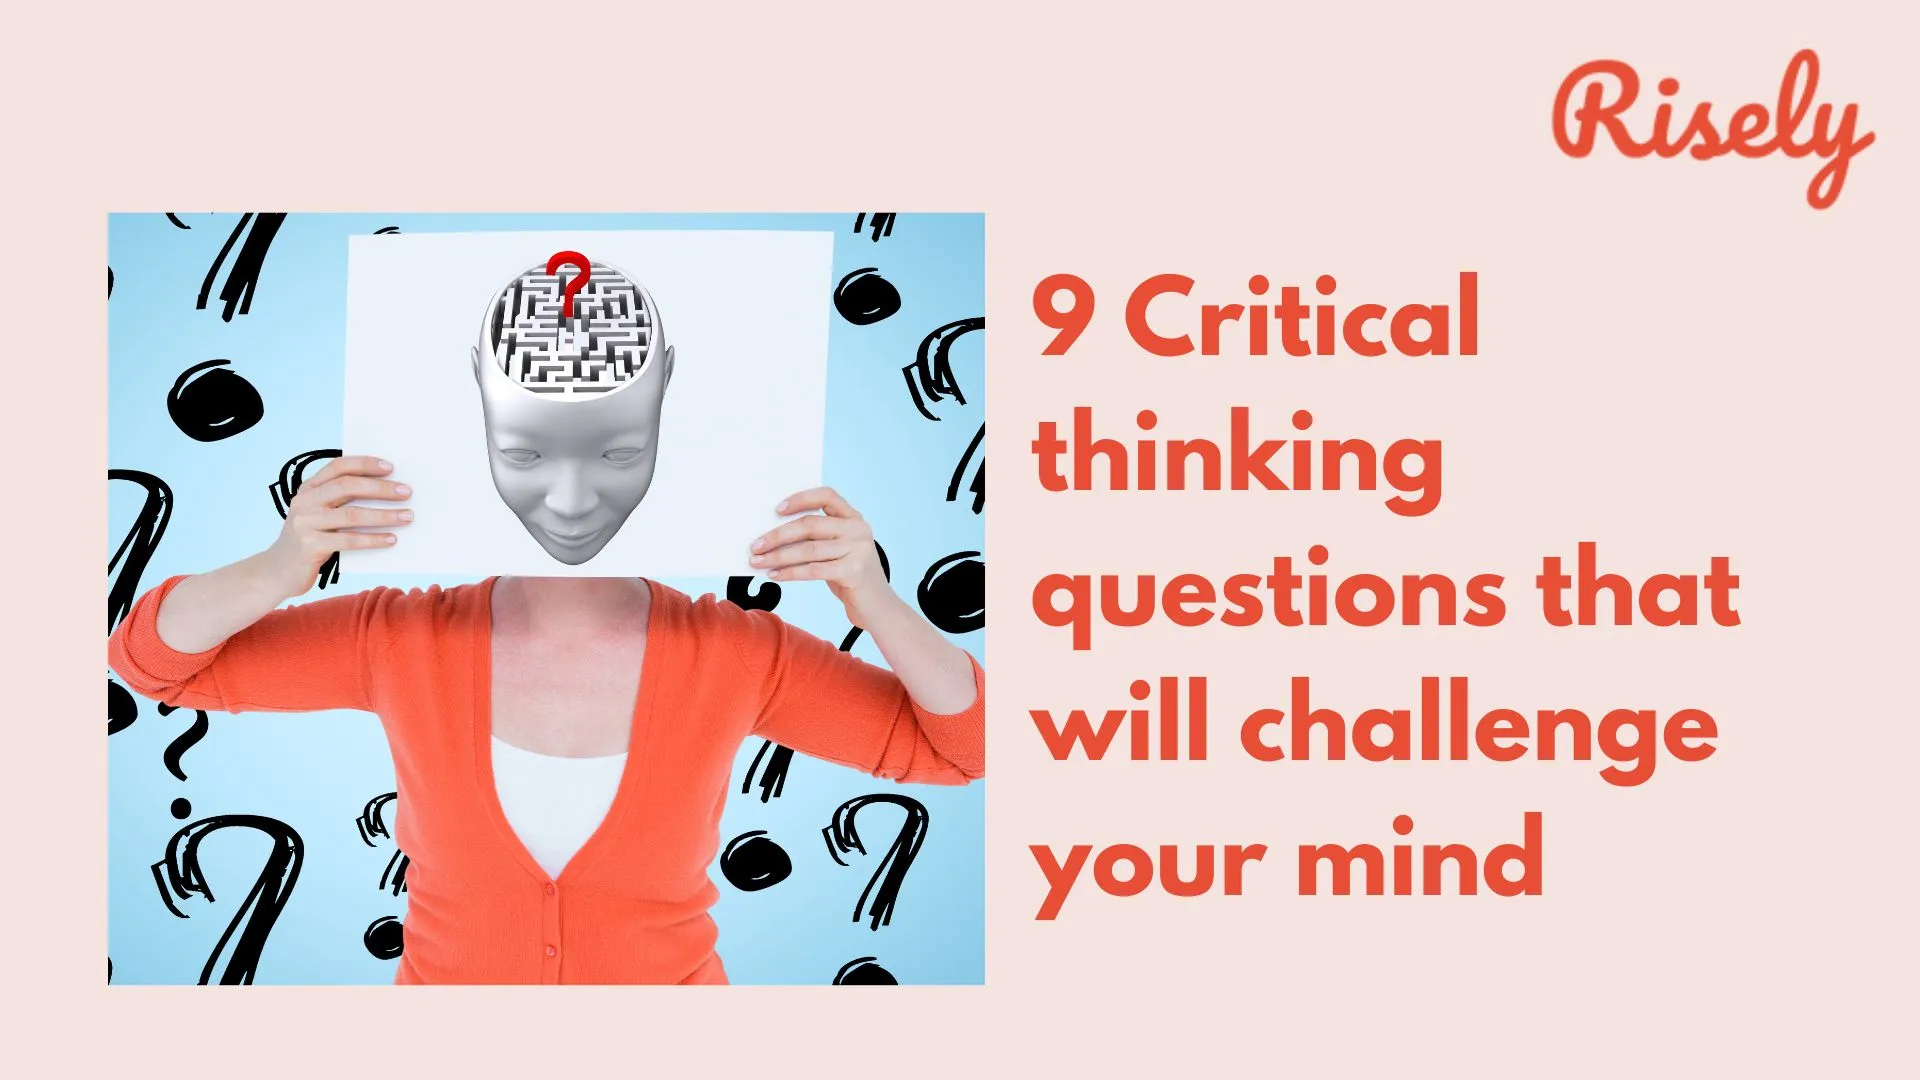 9 Critical thinking questions that will challenge your mind